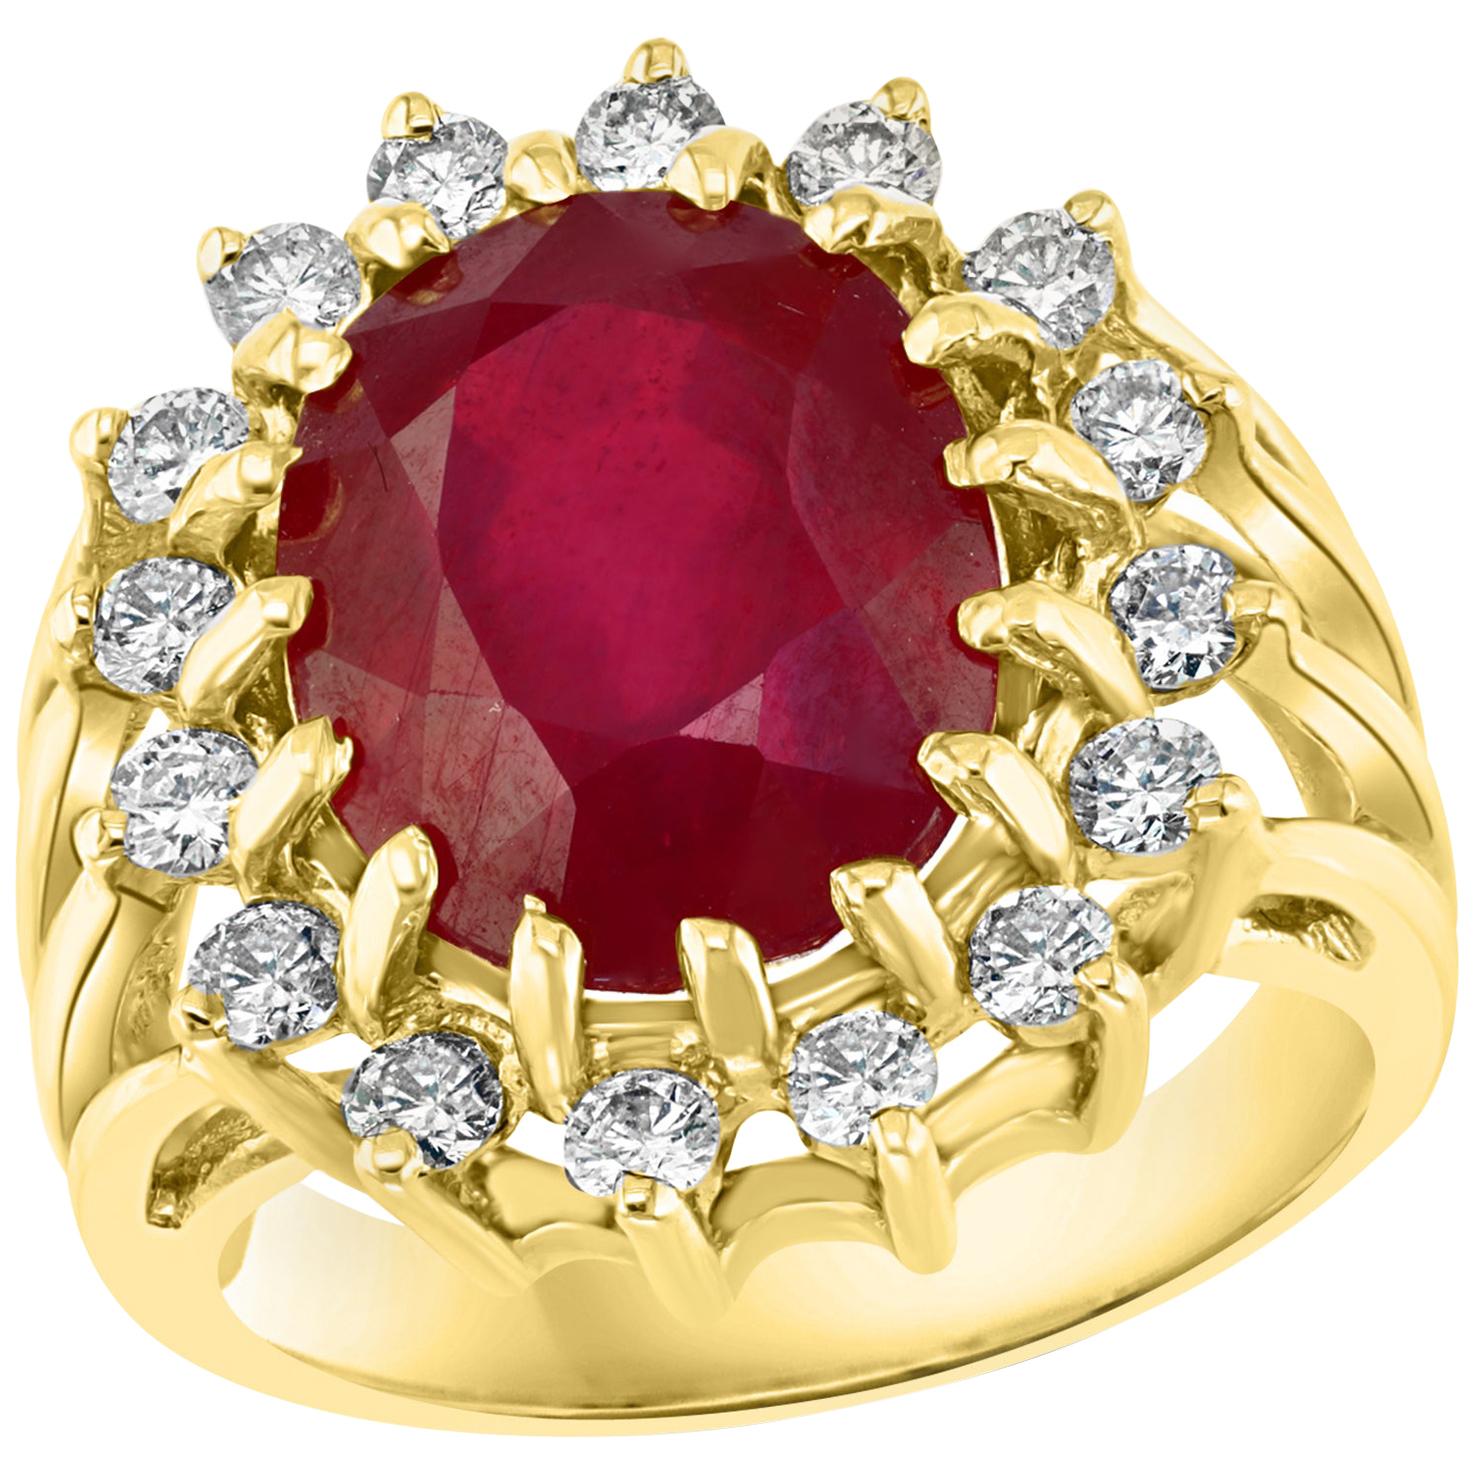 5 Carat Treated Ruby and Diamond 14 Karat Yellow Gold Cocktail Ring